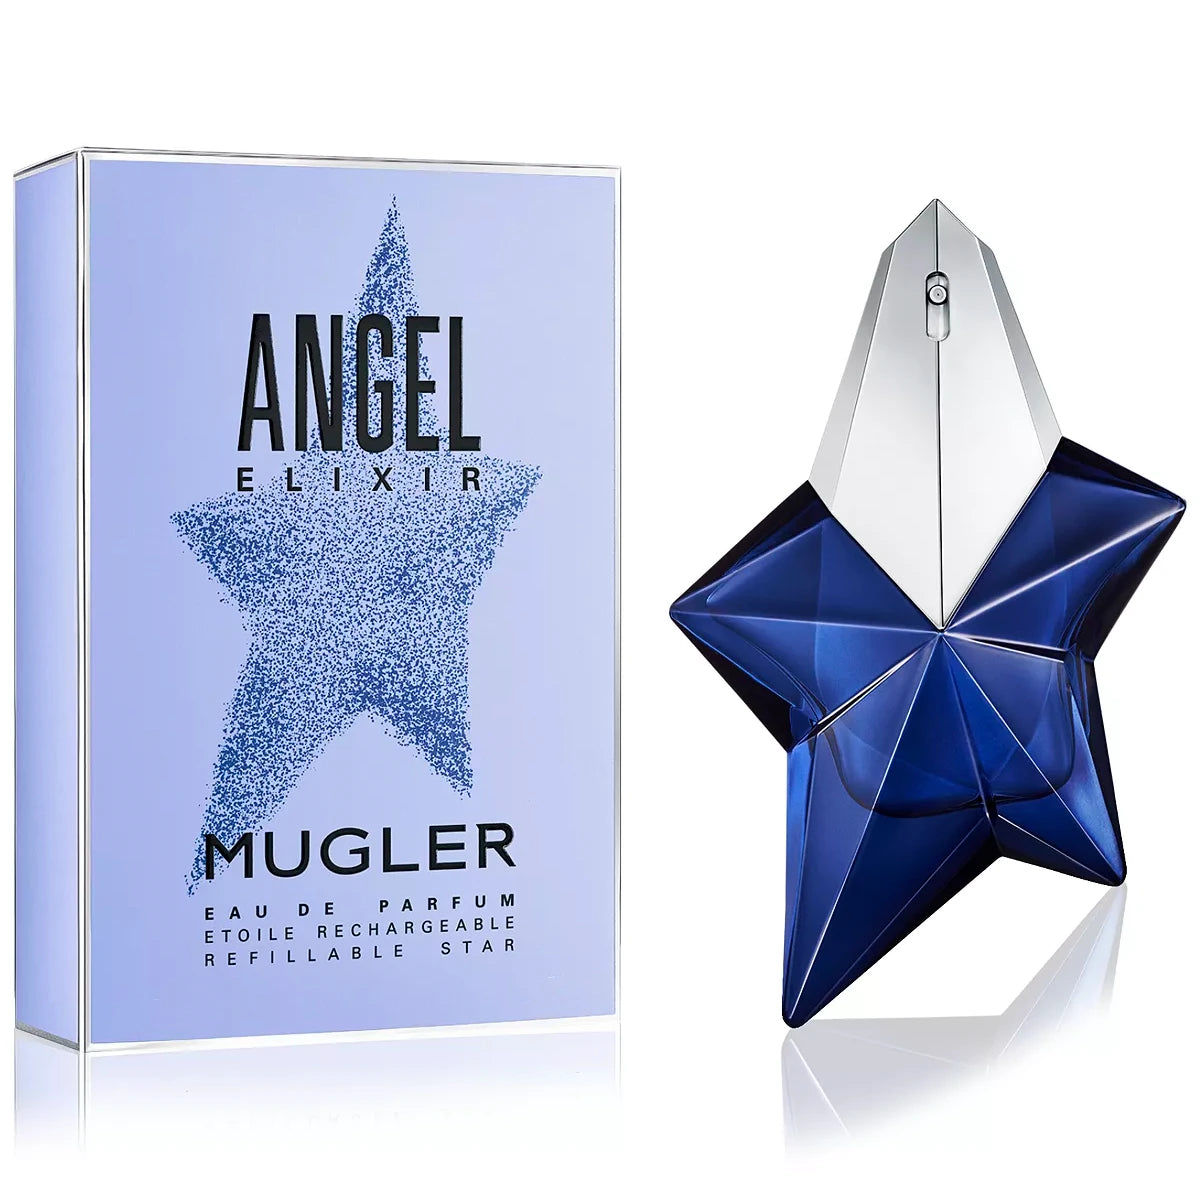 <p>Experience the unexpected with Angel Elixir Eau de Parfum by MUGLER, a woody floral gourmand scent. Augmented femininity is celebrated with a powerful blend of sensuous vanilla, vibrant woods, and a spicy hook. Embrace your fearless side and indulge in its magnetic attraction.</p>
<ul class="c-small-font c-margin-bottom-4v bullets-section" data-auto="product-description-bullets" data-mce-fragment="1"></ul>